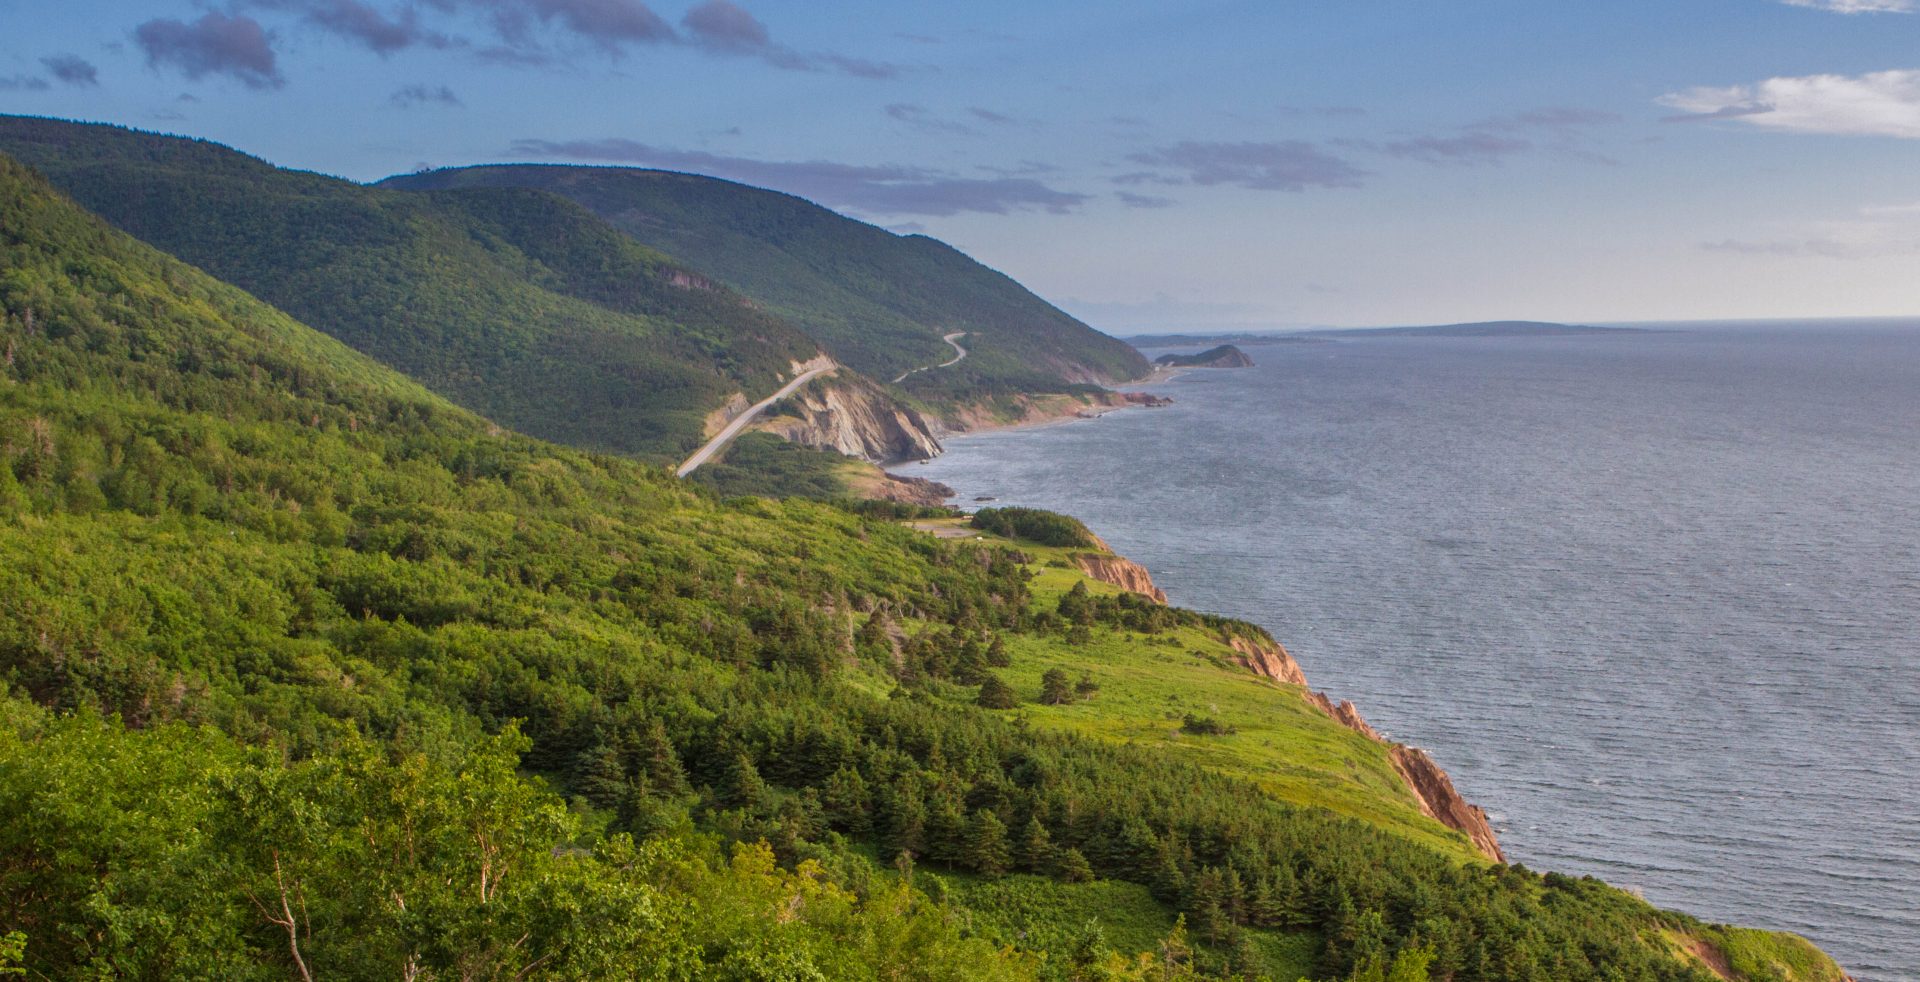 The Cabot Trail in Cape Breton Island is one our bucket list destinations in Canada.